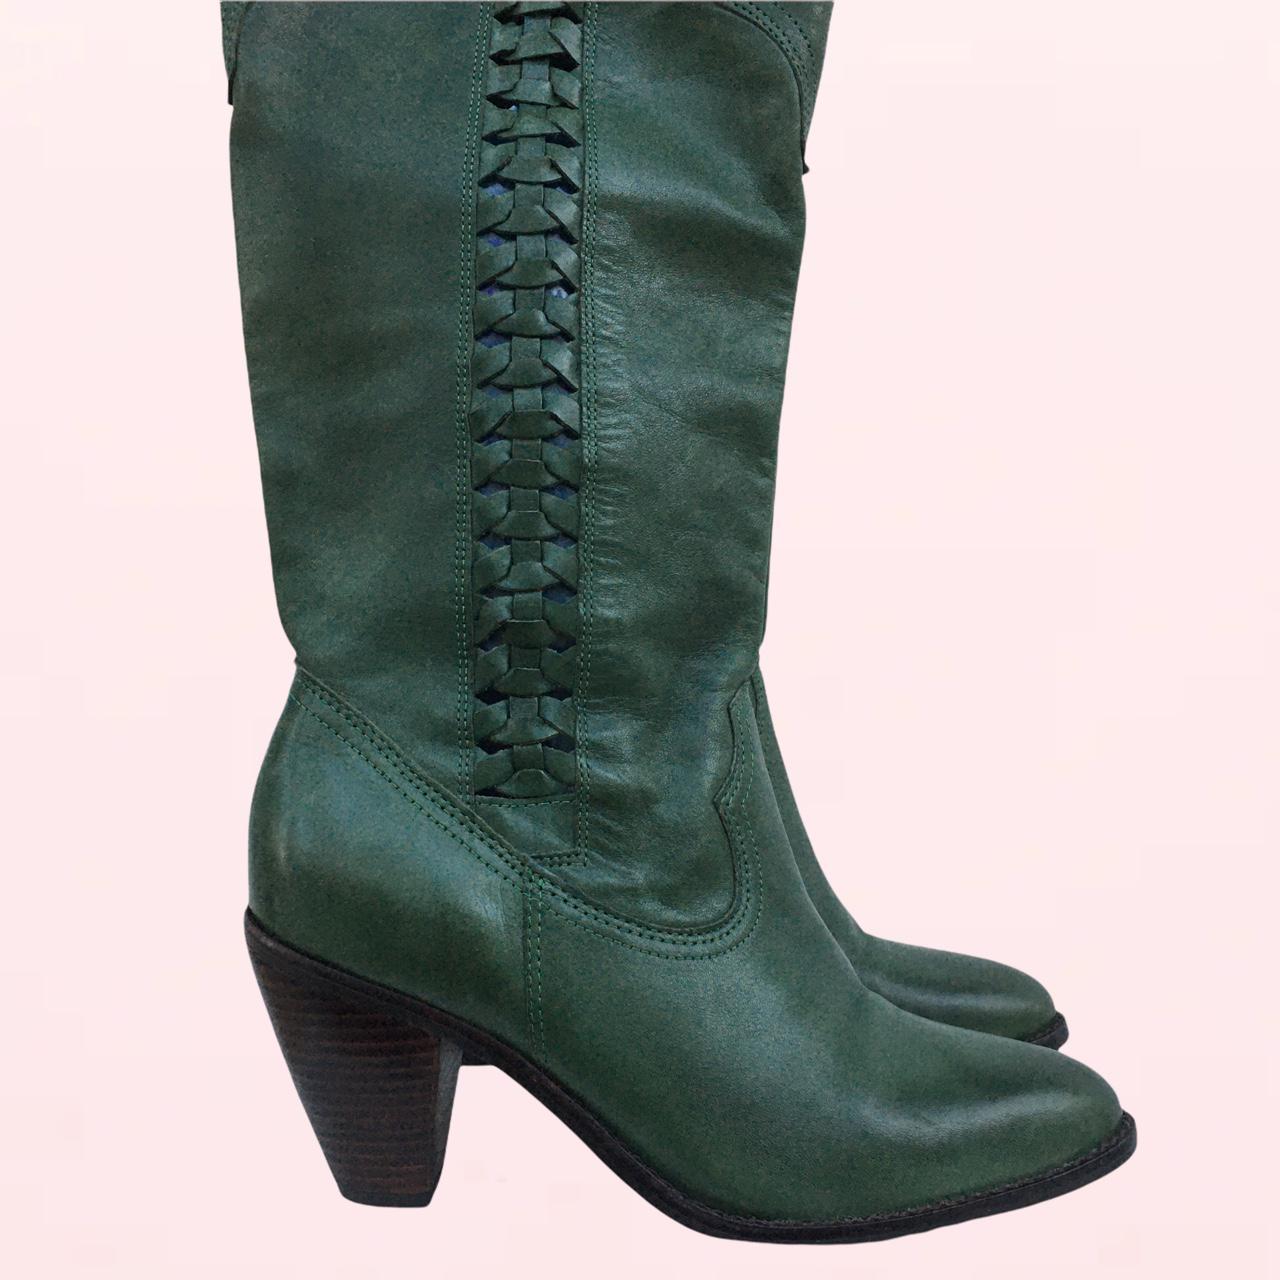 Vintage green leather cowboy boots with plaited... - Depop